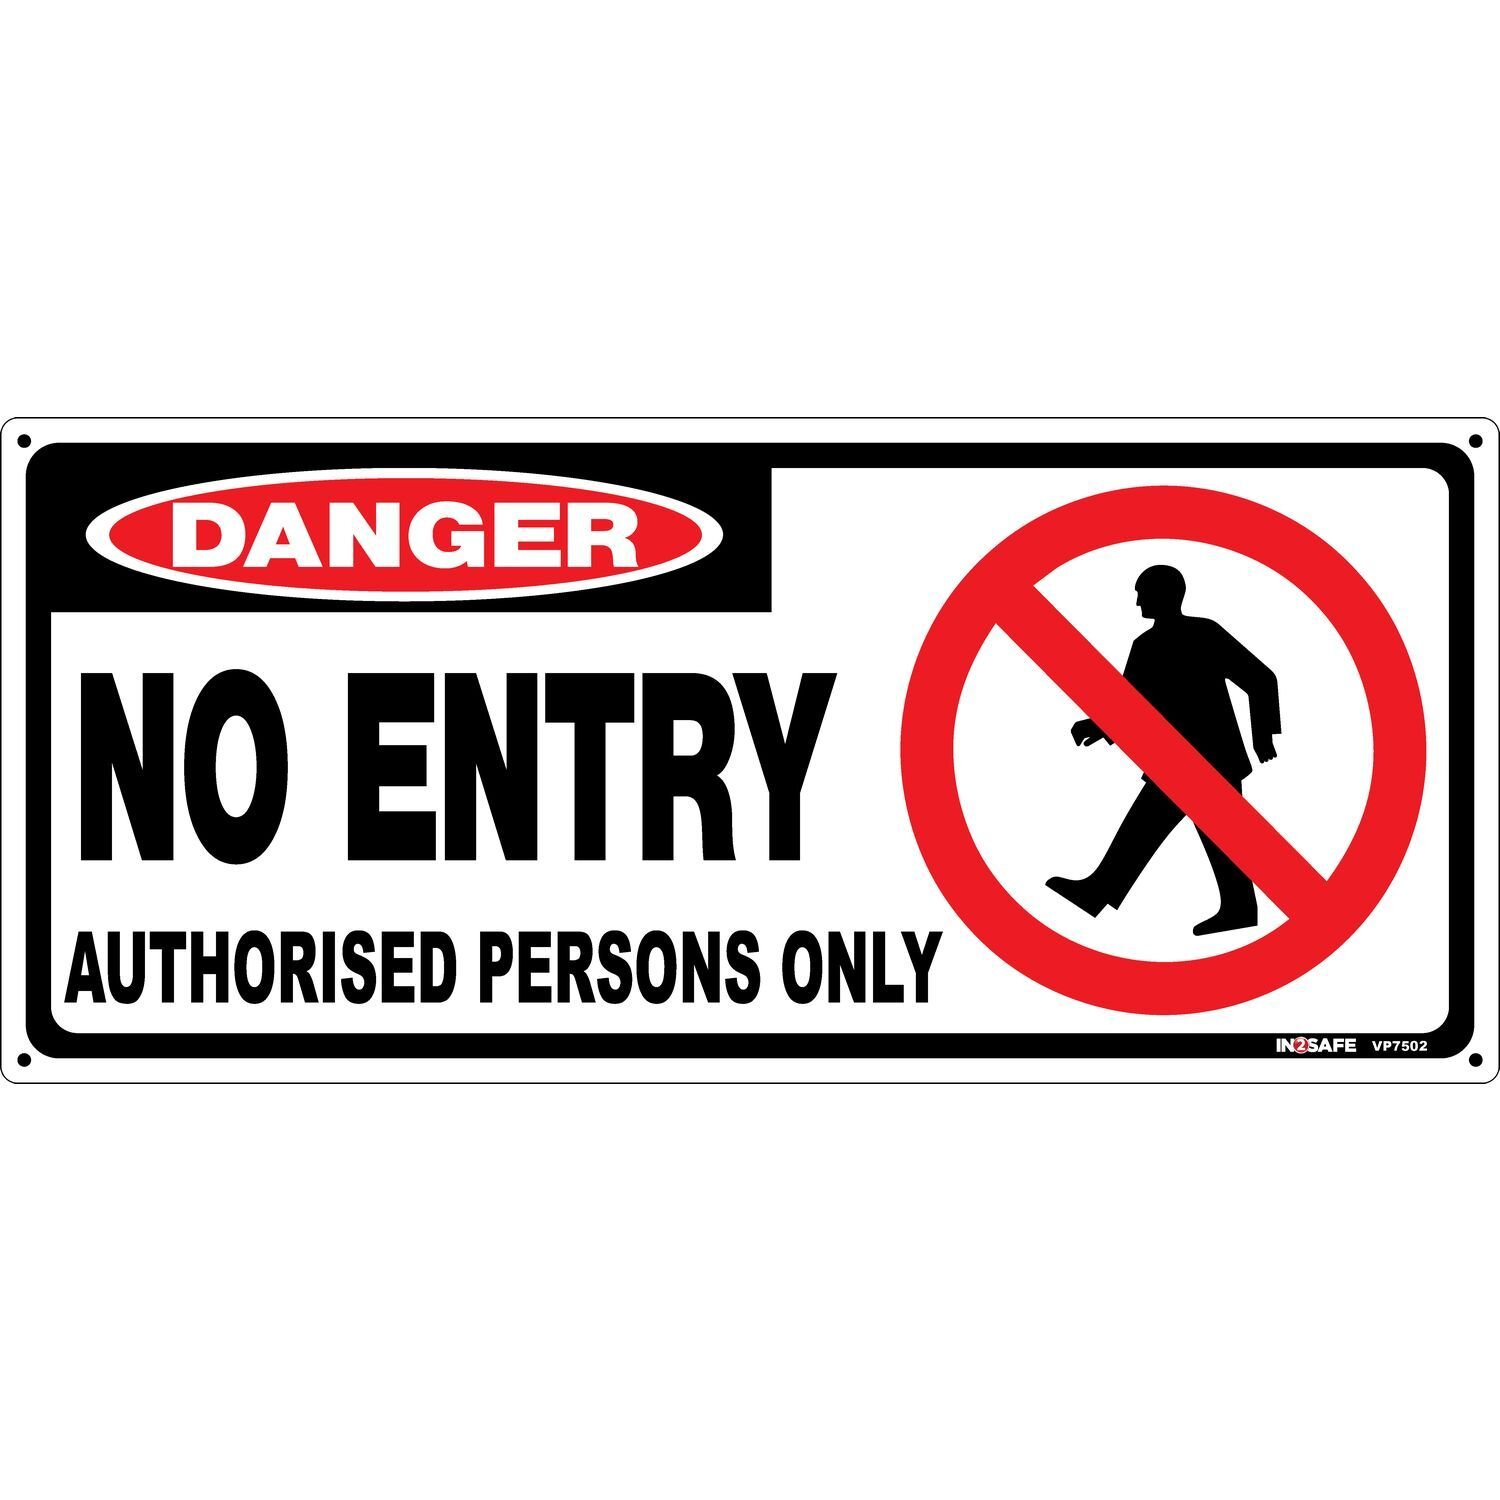 DANGER No Entry Authorised Persons Only